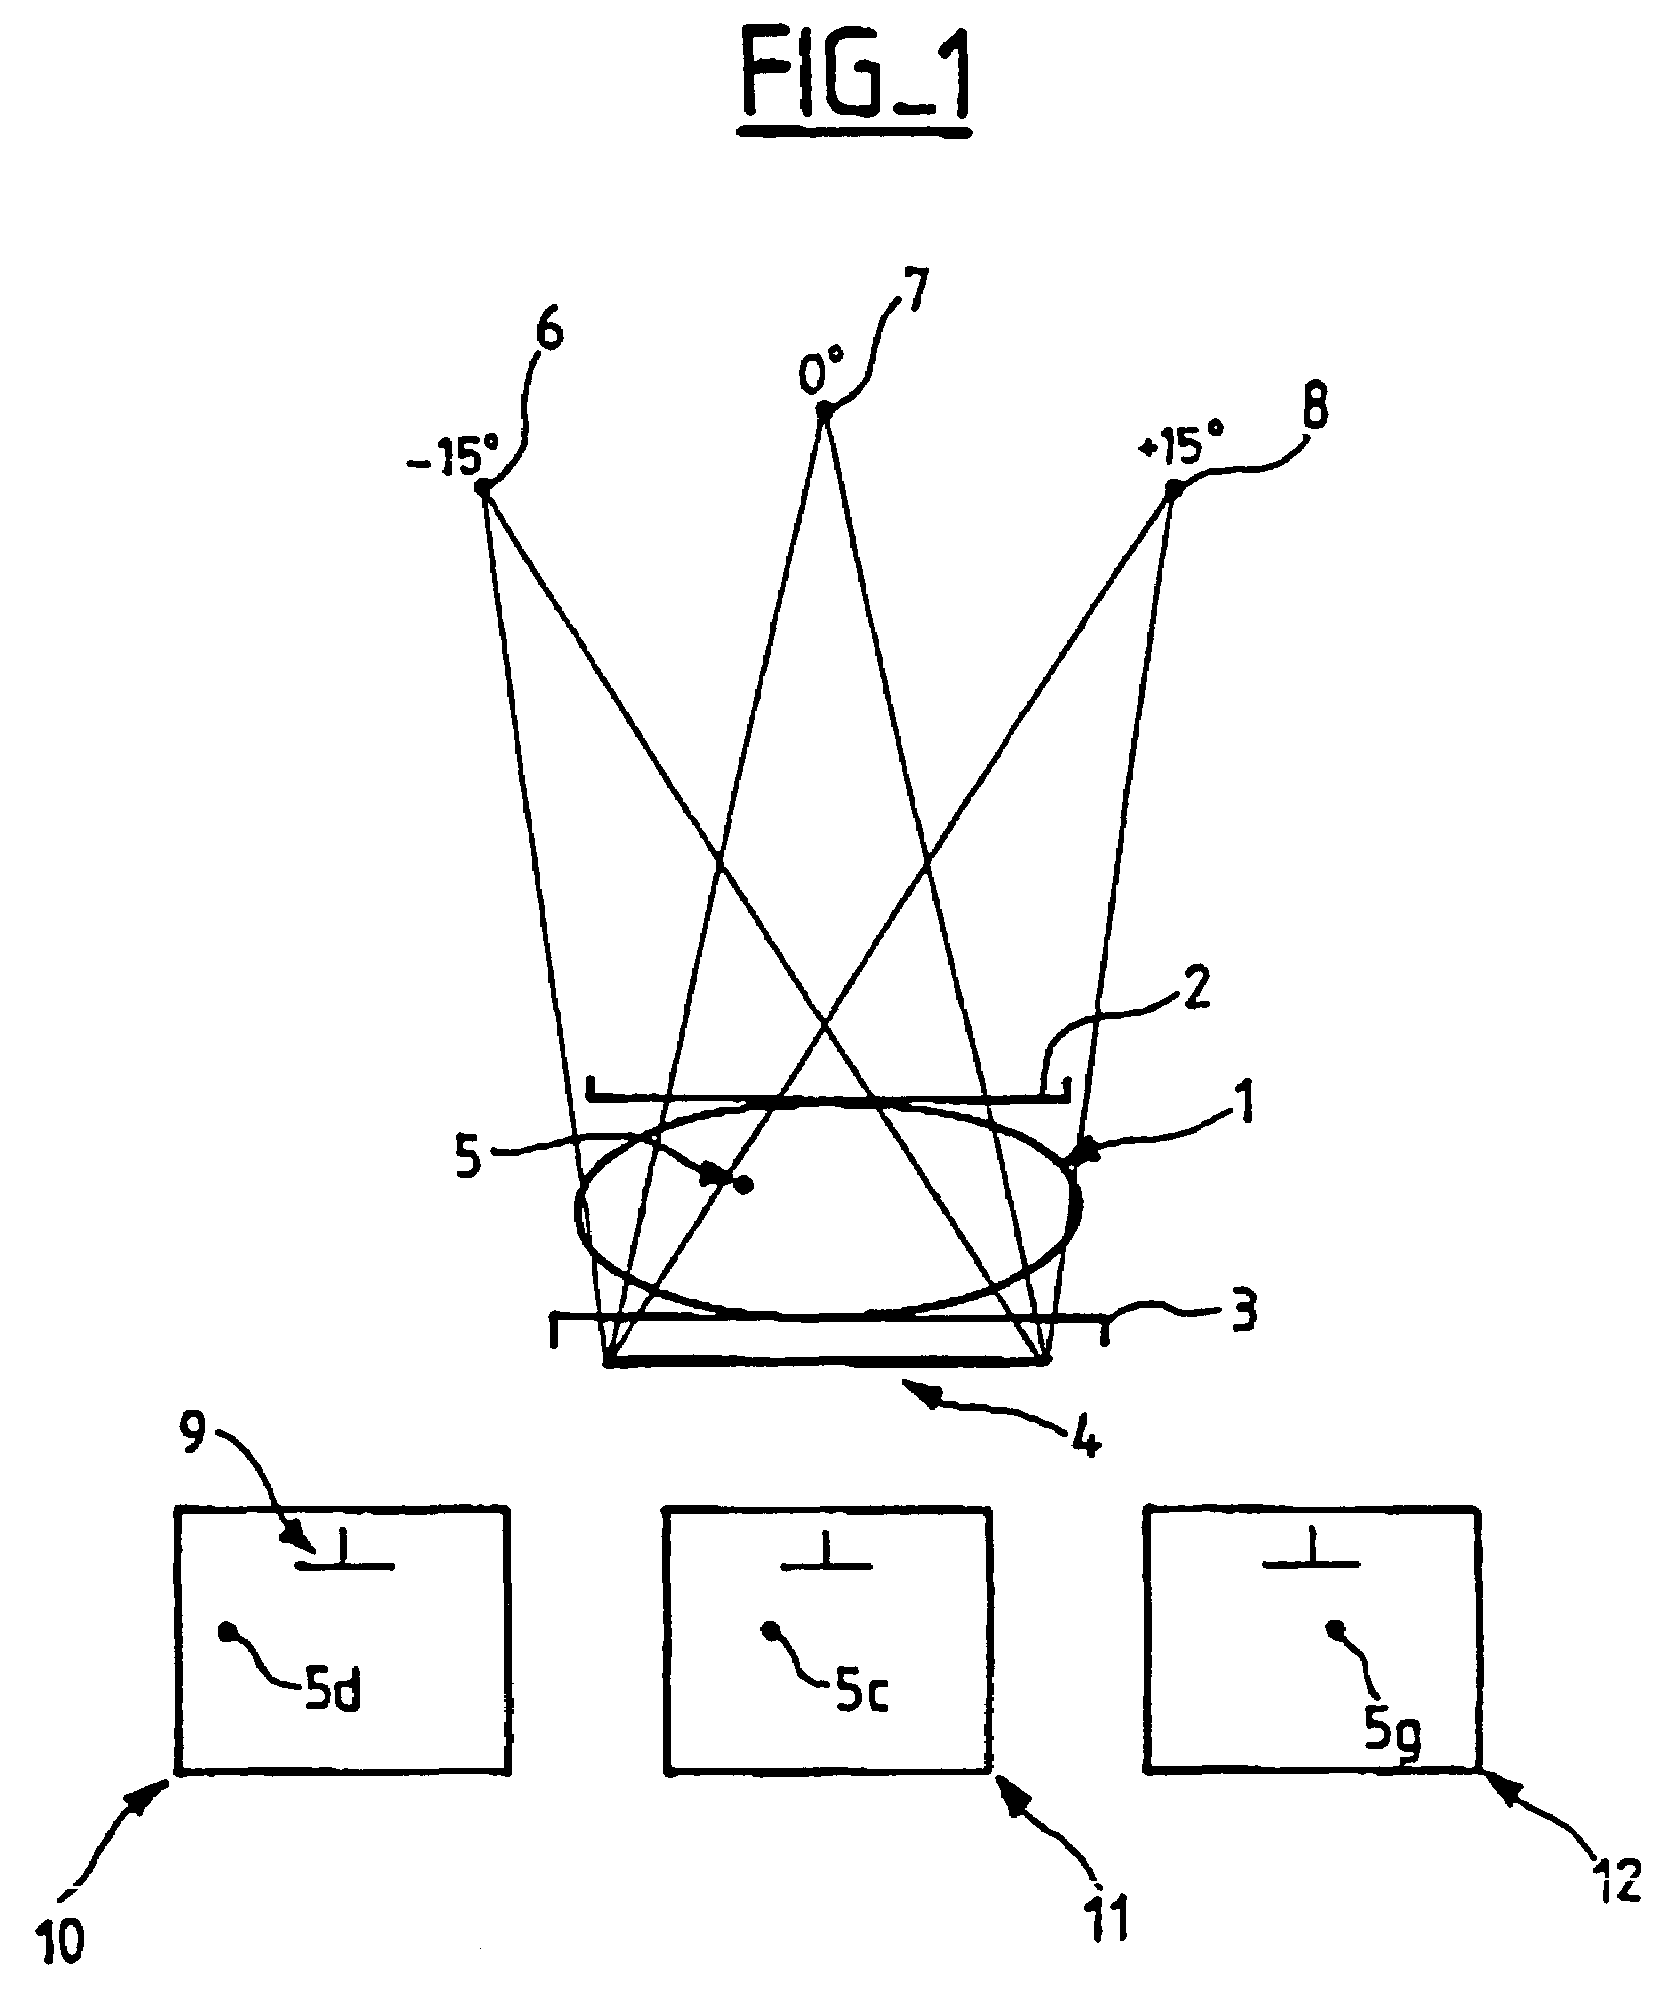 Method for locating an element of interest contained in a three-dimensional object, in particular during a stereotactic investigation in the X-ray examination of the breast